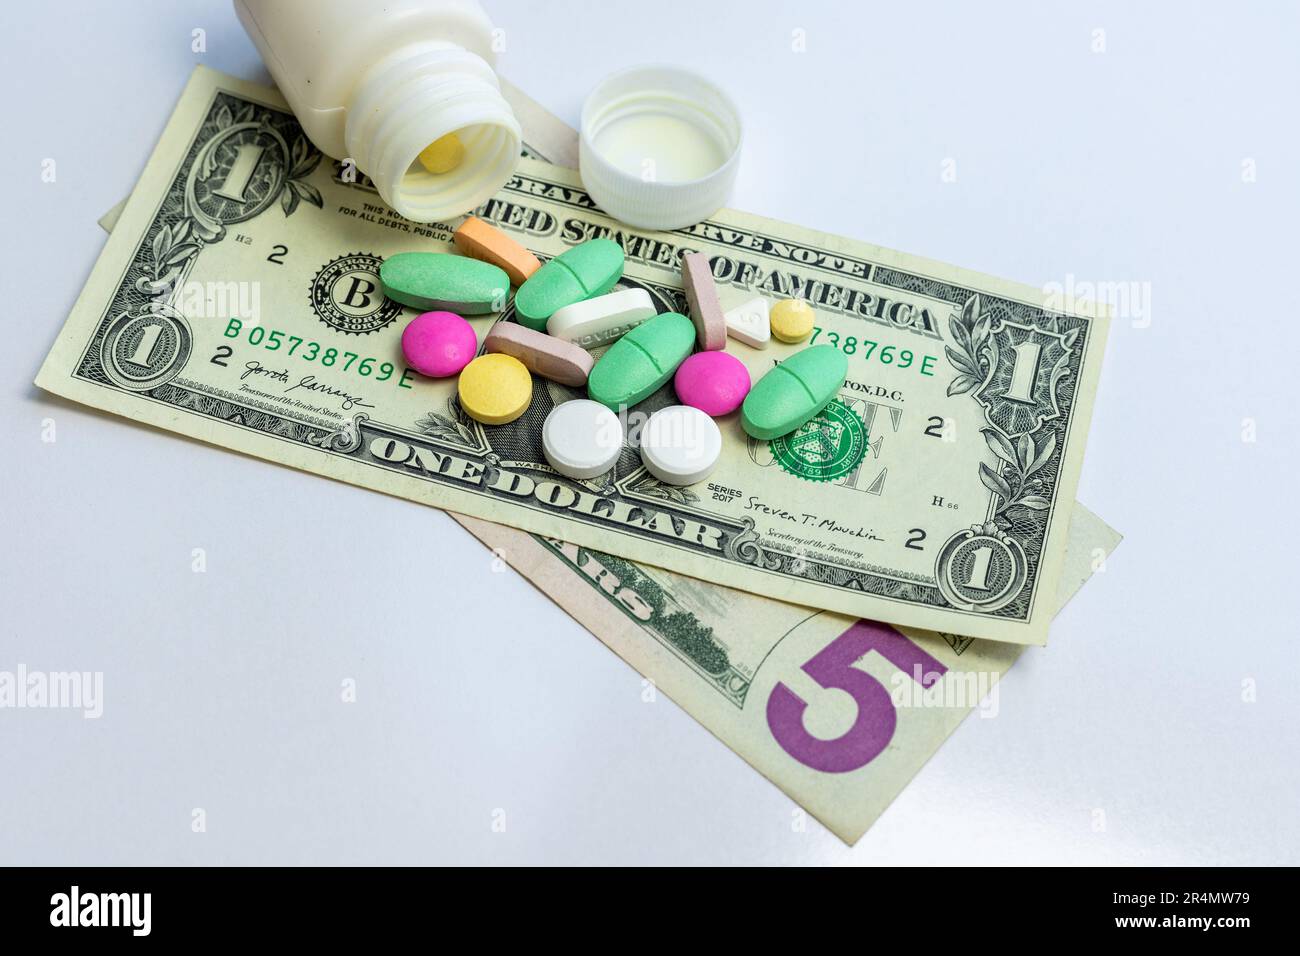 Medicine pills and tablets scattered from a bottle on US dollar bills. Health care expenses concept. Stock Photo